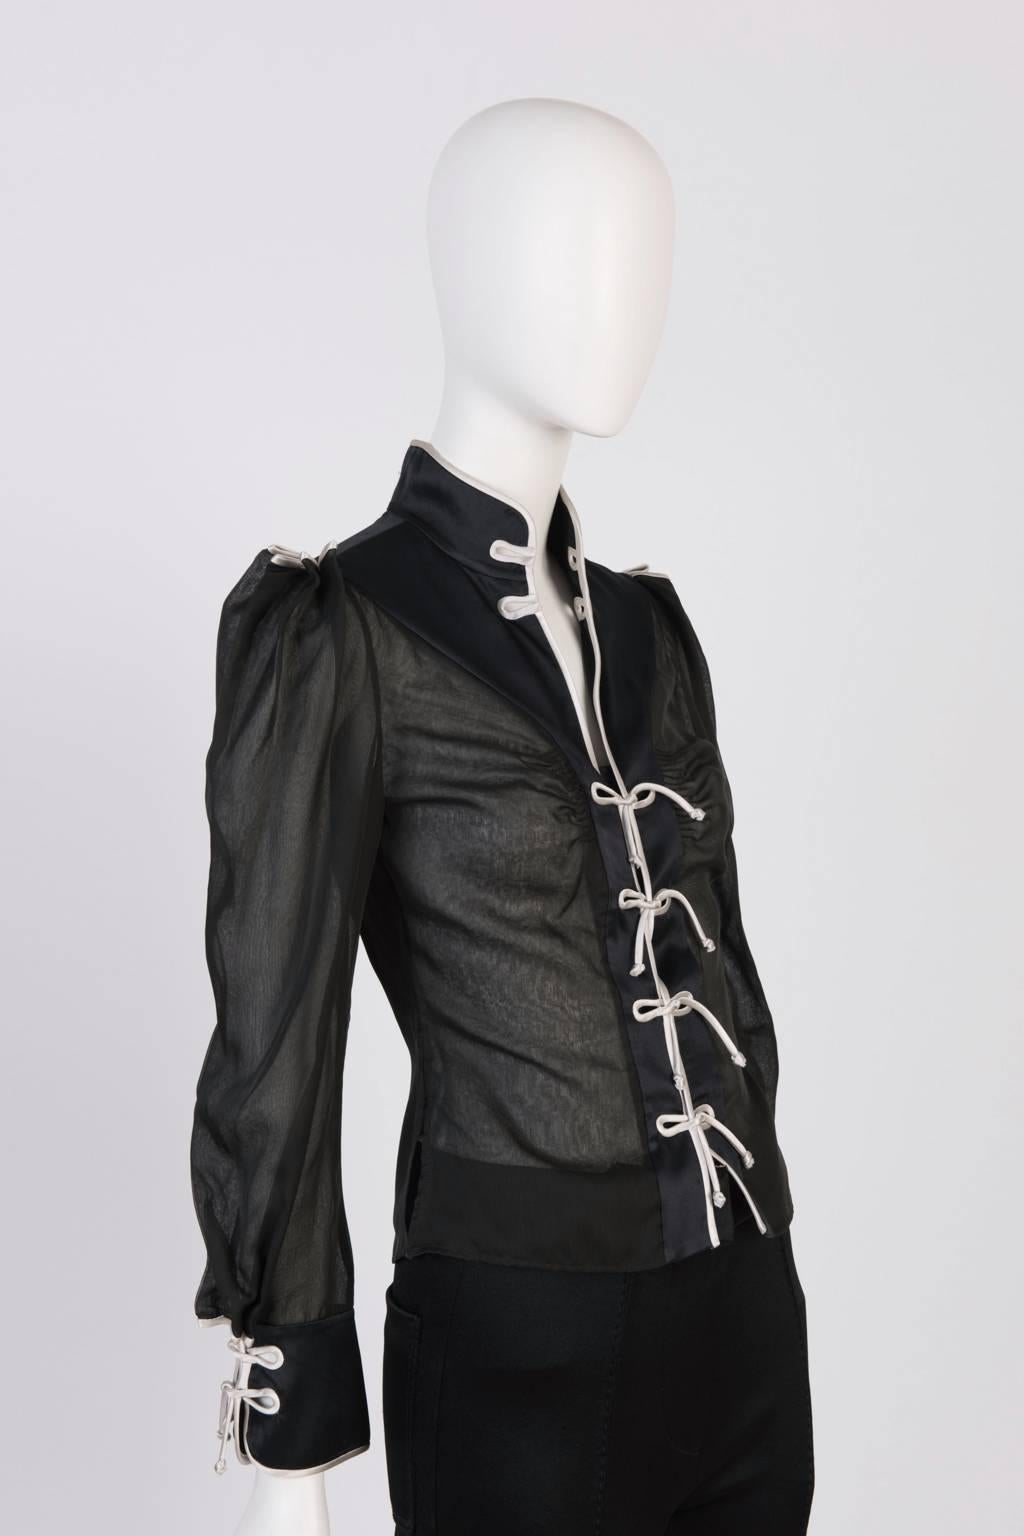 Chinoiserie-victorian style Yves Saint Laurent blouse featuring oriental collar, cuffs and fasterning. Fitted at waist and slightly puffed at shoulder. Organza body with satin pipings.